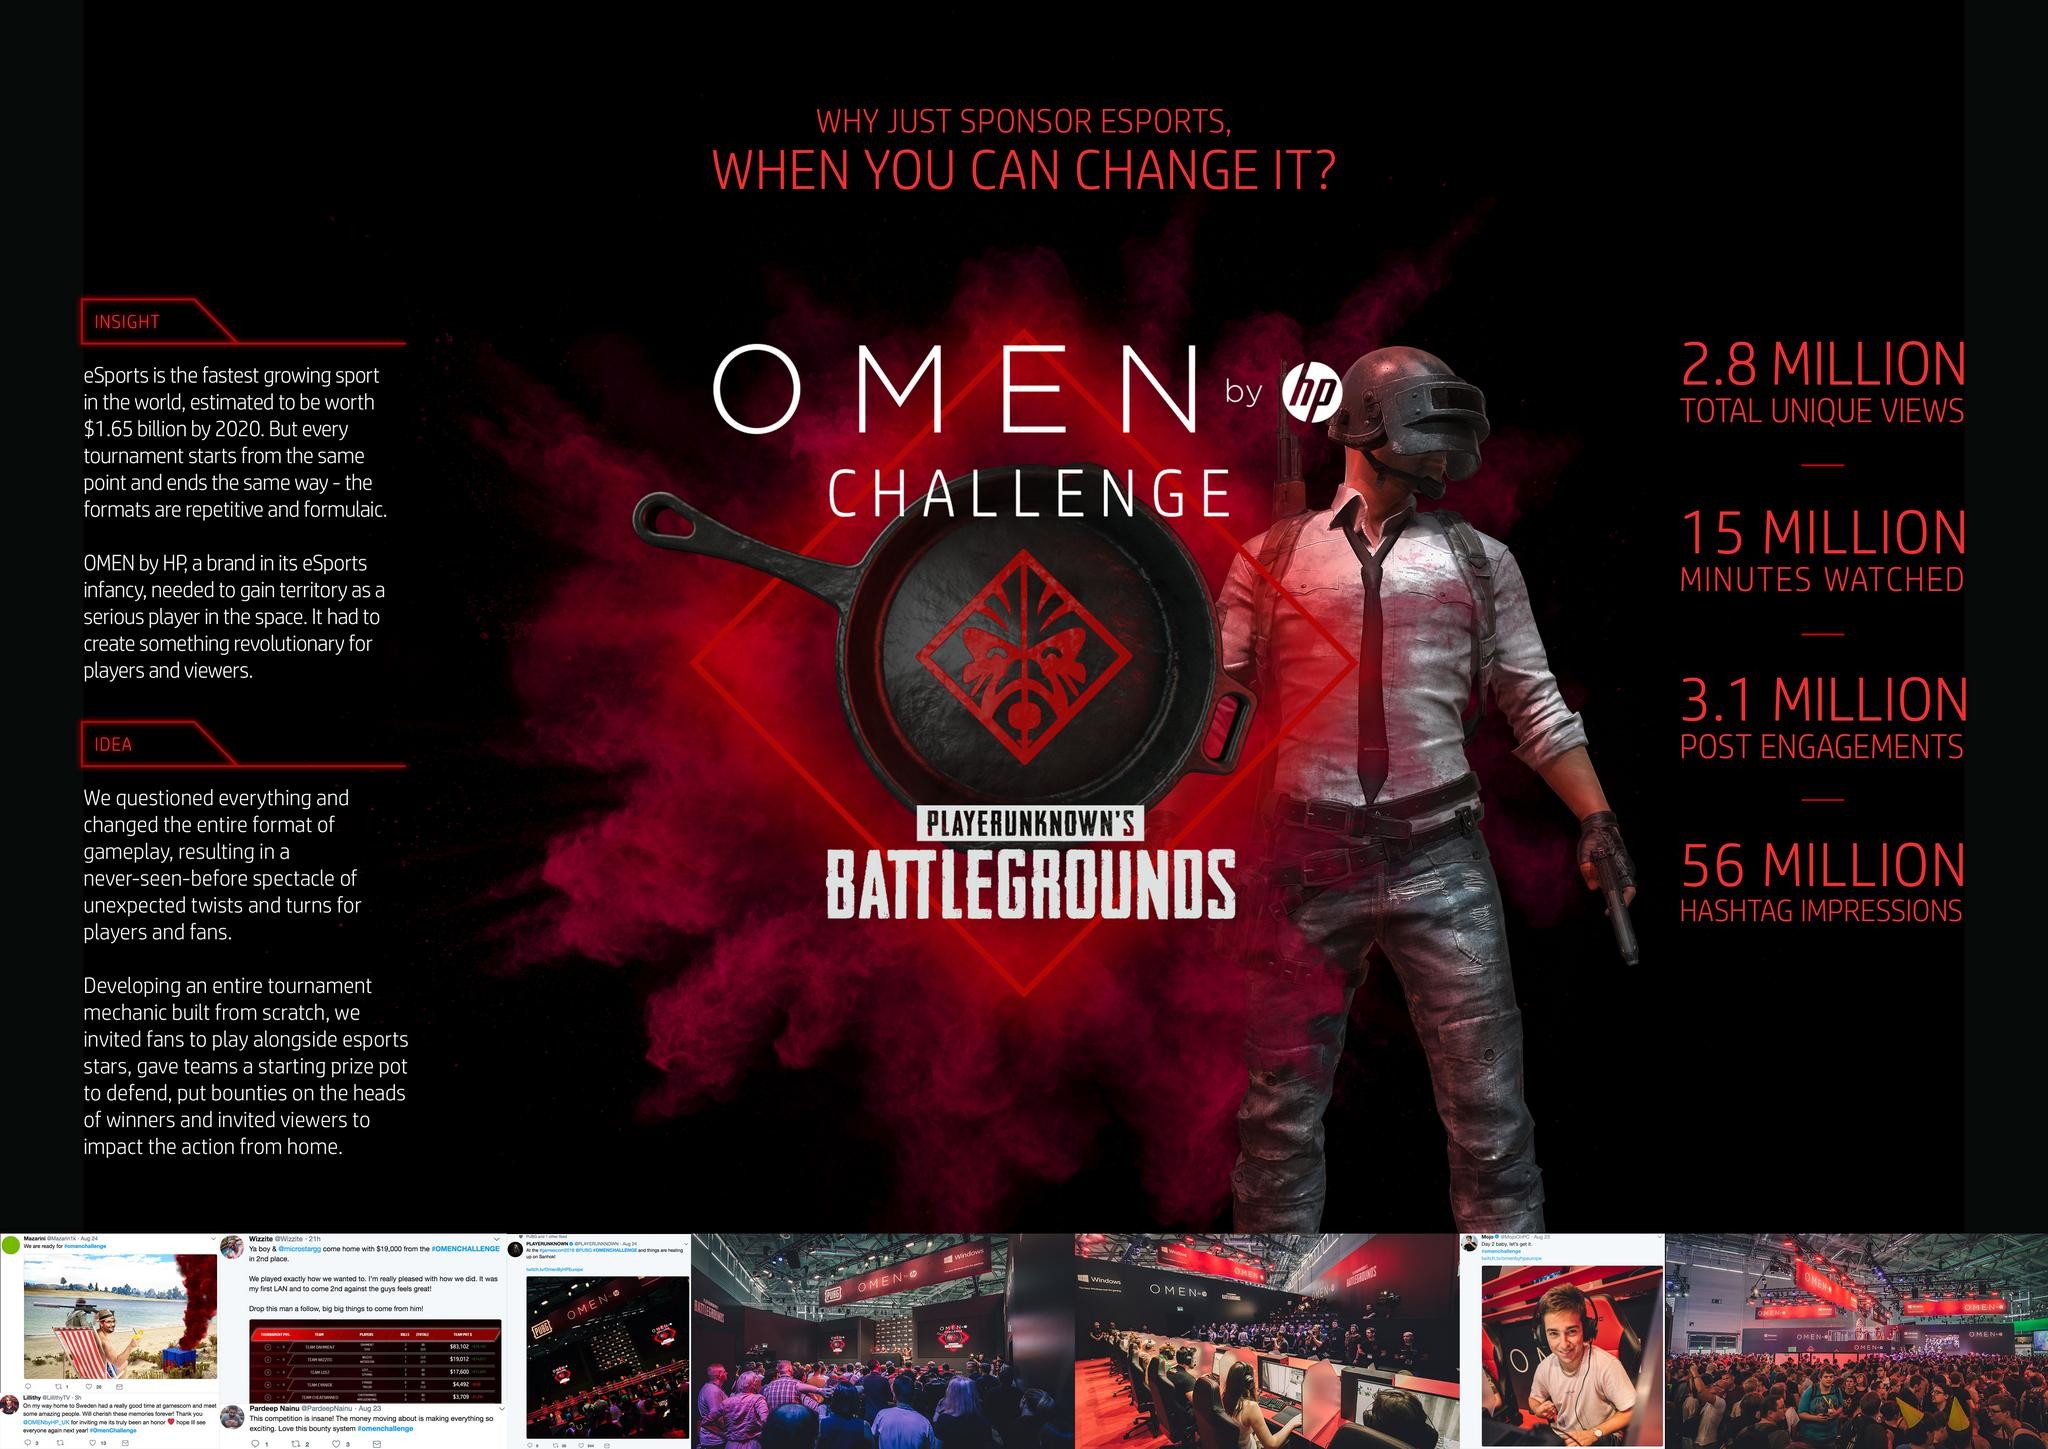 The OMEN by HP Challenge 2018